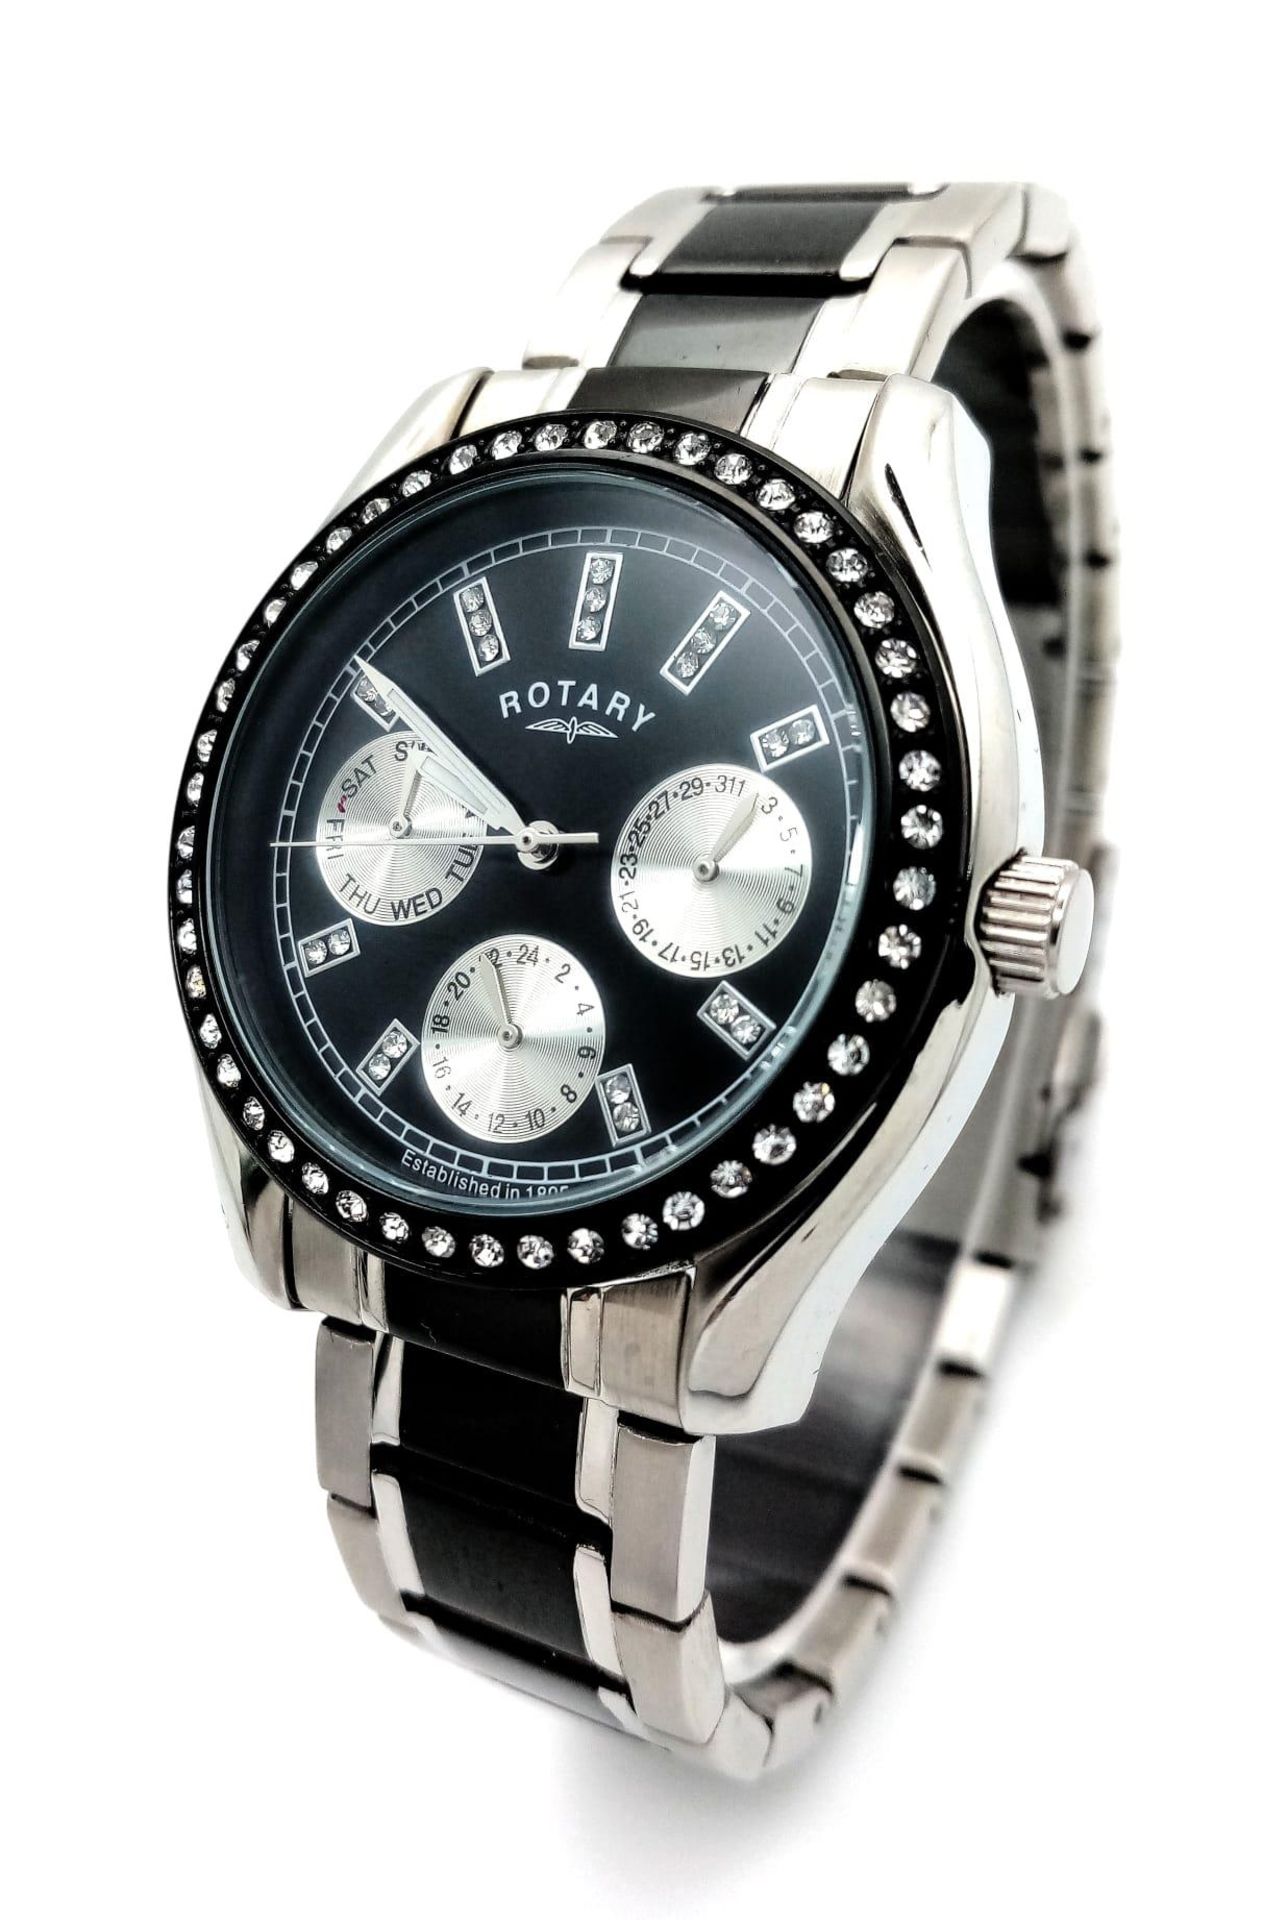 An Excellent Condition Stainless Steel Rotary, Stone Set Bezel, Quartz Watch Model LB04337. 39mm - Image 2 of 7